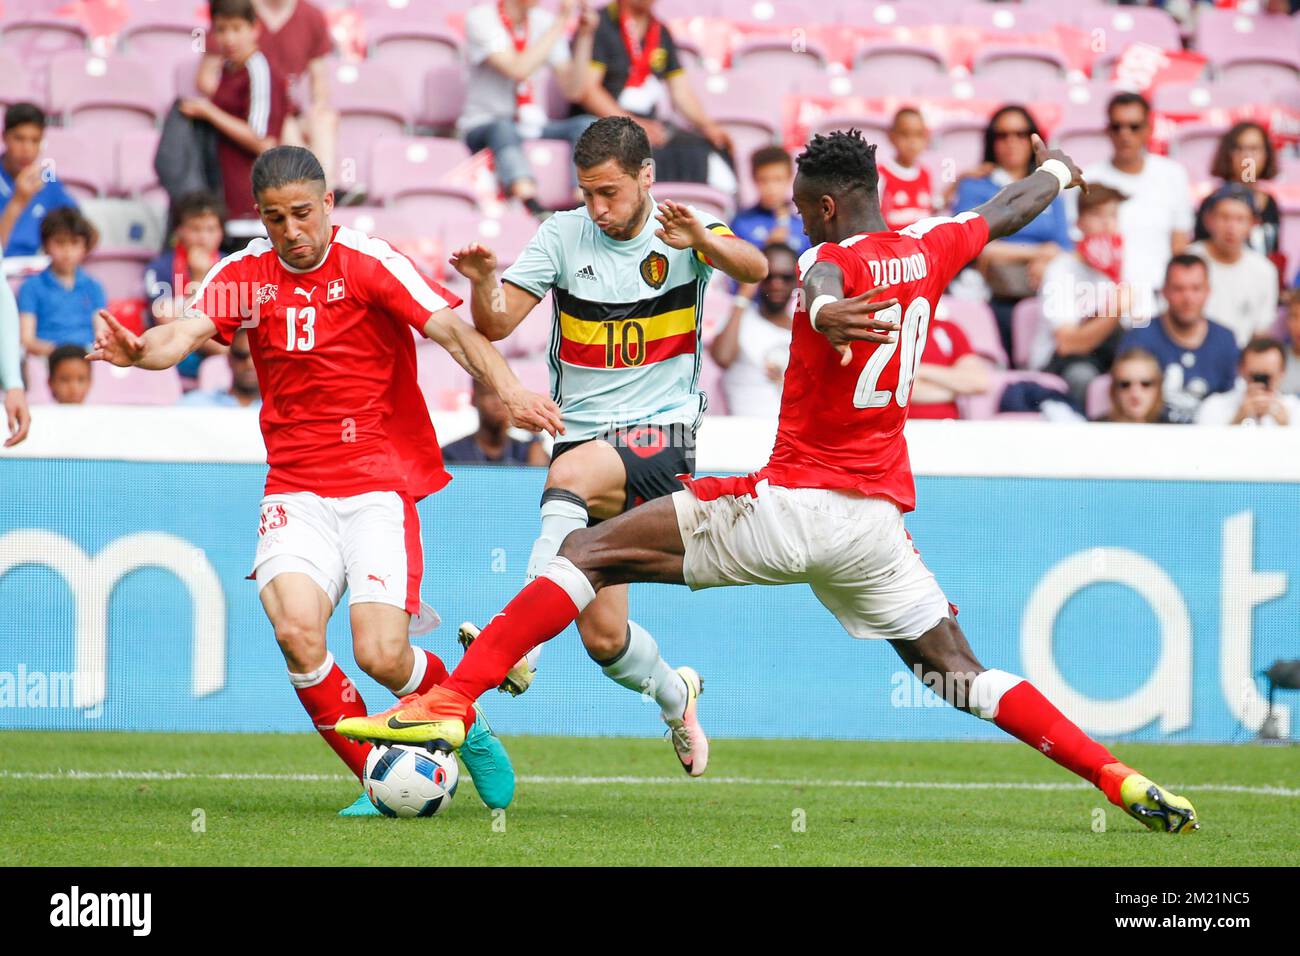 Switzerland's Ricardo Rodriguez, Belgium's Eden Hazard and Switzerland's Johan Djourou fight for the ball during a friendly soccer game between the Swiss national team and the Belgian national soccer team Red Devils, after a training camp, on Saturday 28 May 2016, in Geneve, Switzerland. The team is preparing for the upcoming Euro 2016 UEFA European Championship in France.  Stock Photo